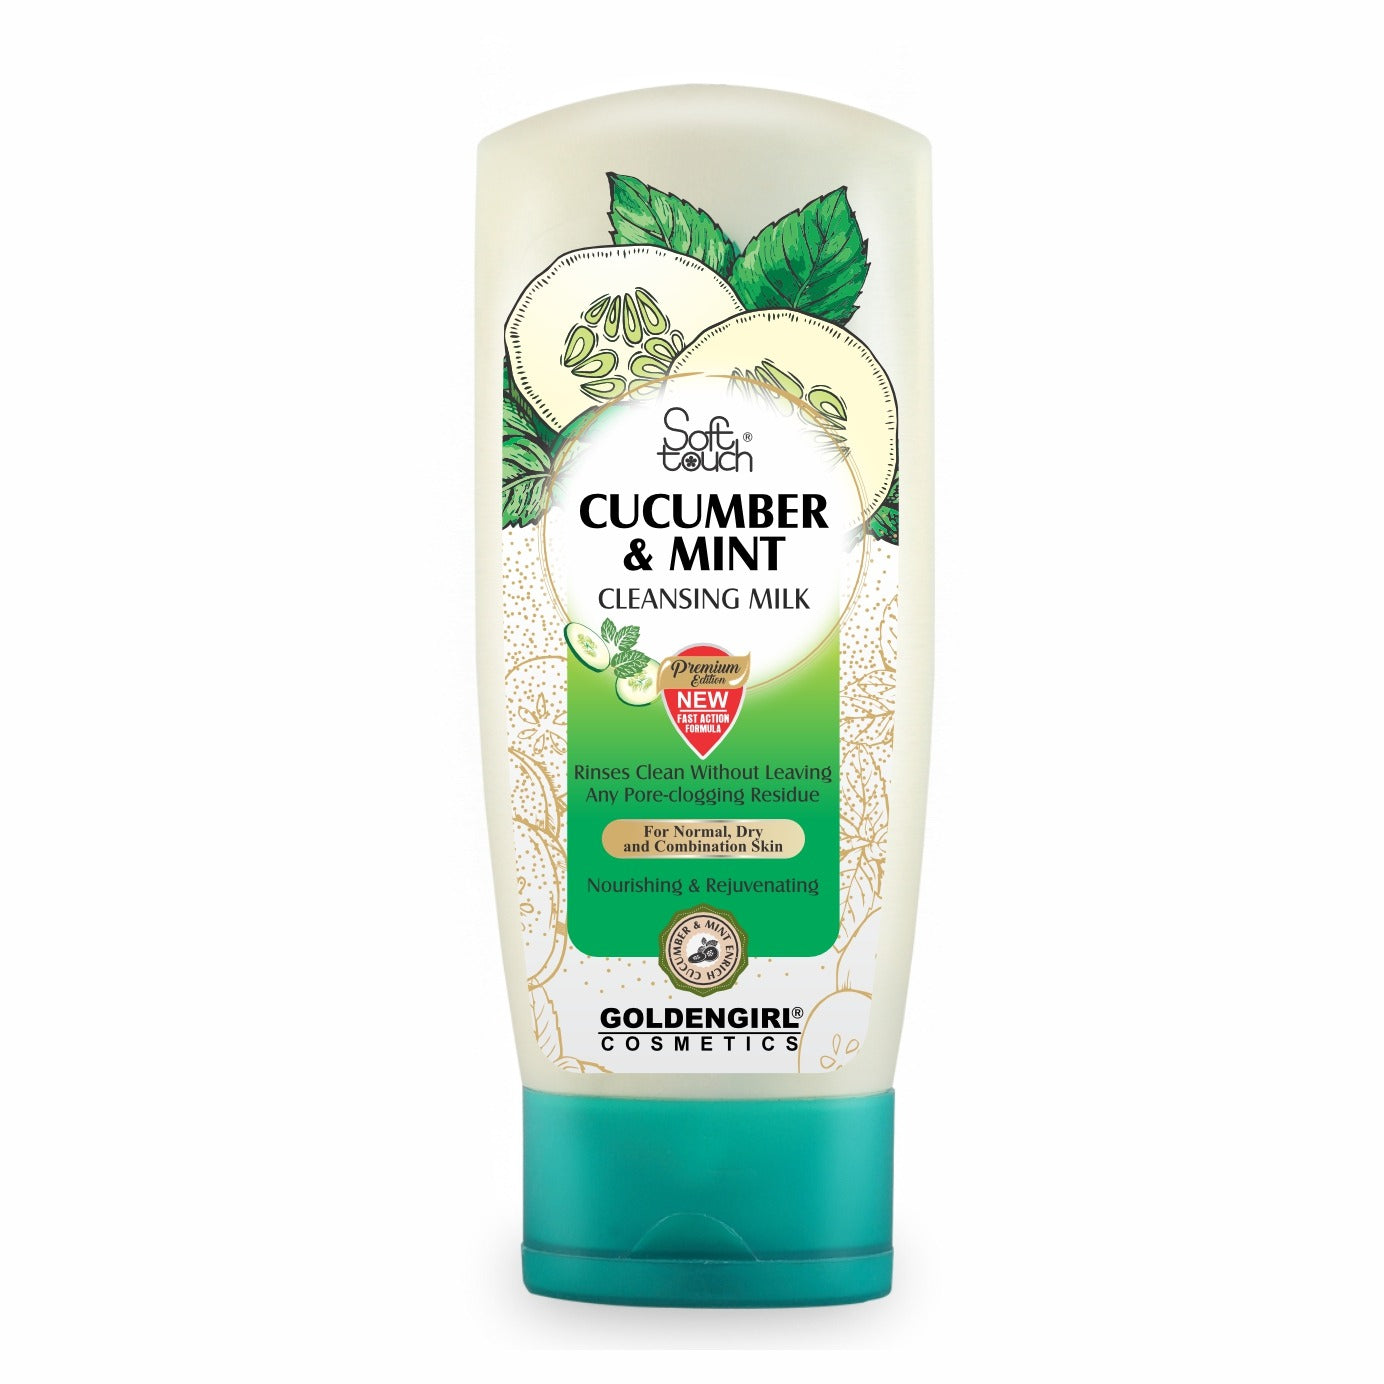 SOFTTOUCH CLEANSING MILK – www.